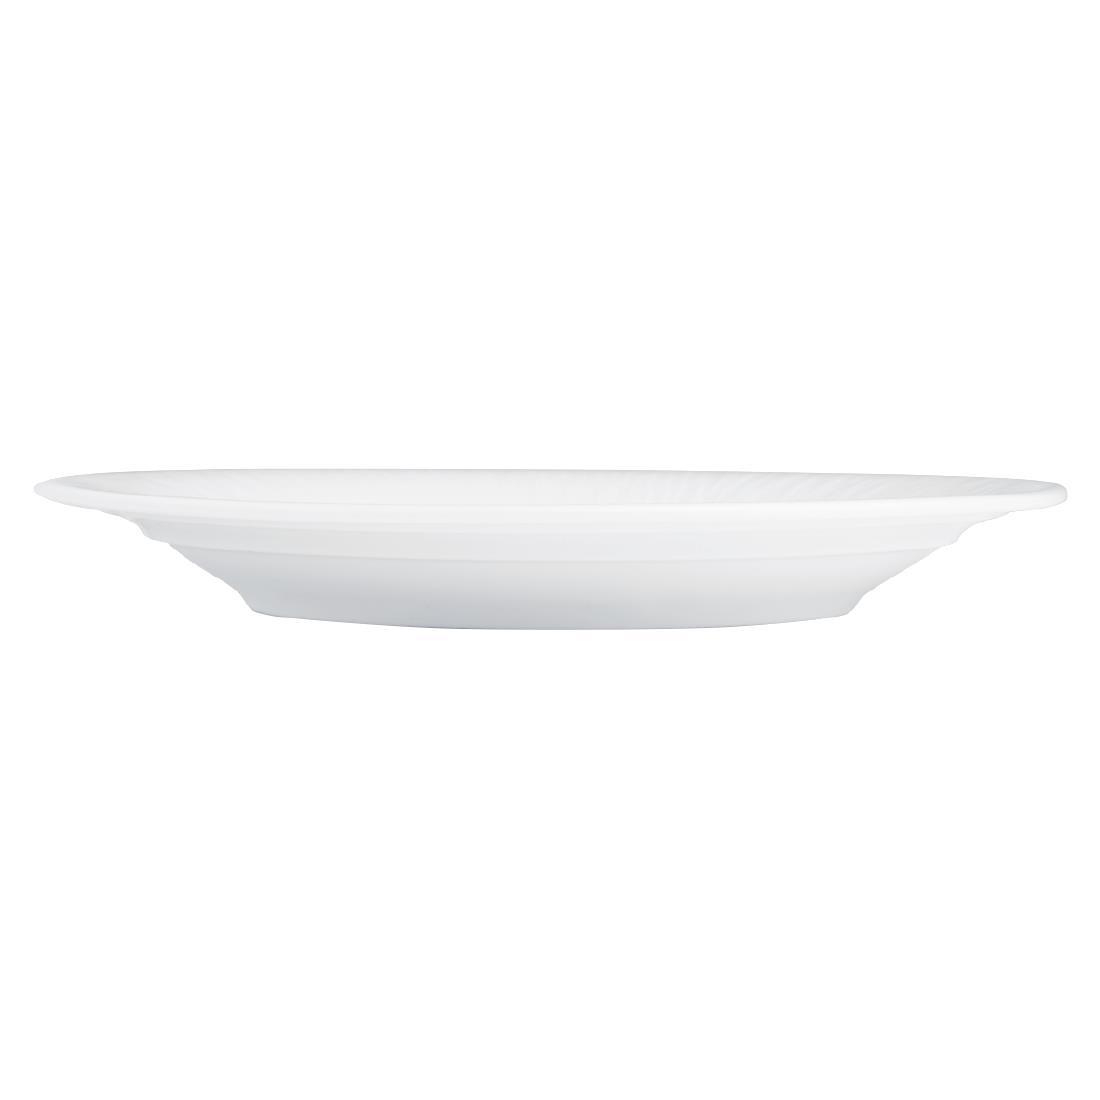 Royal Porcelain Maxadura Solario Plate 230mm (Pack of 12) - GT914  - 3